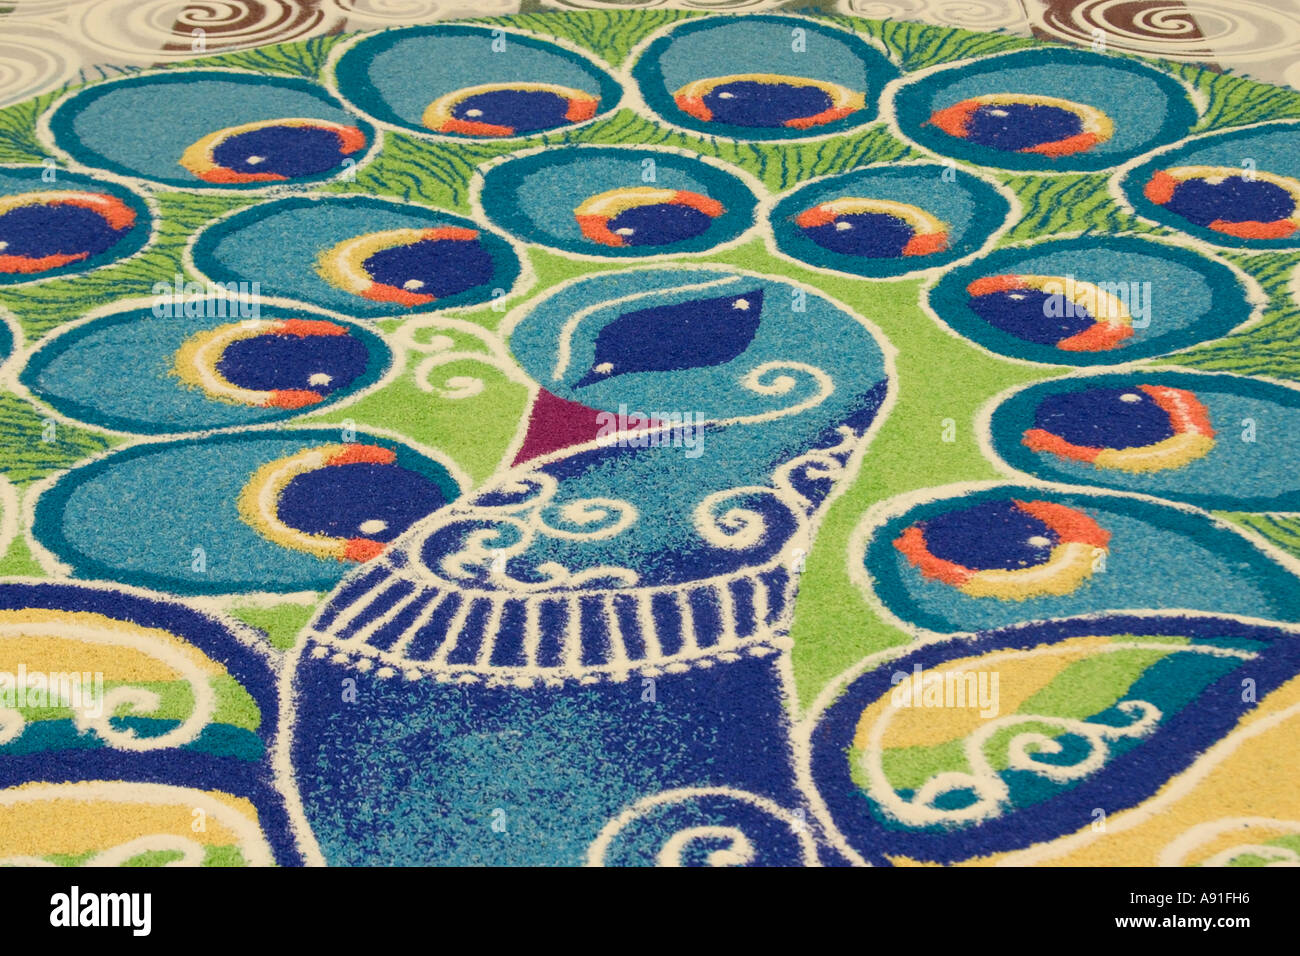 kolam - decorative artwork drawn on floor by south indians using rice Stock Photo